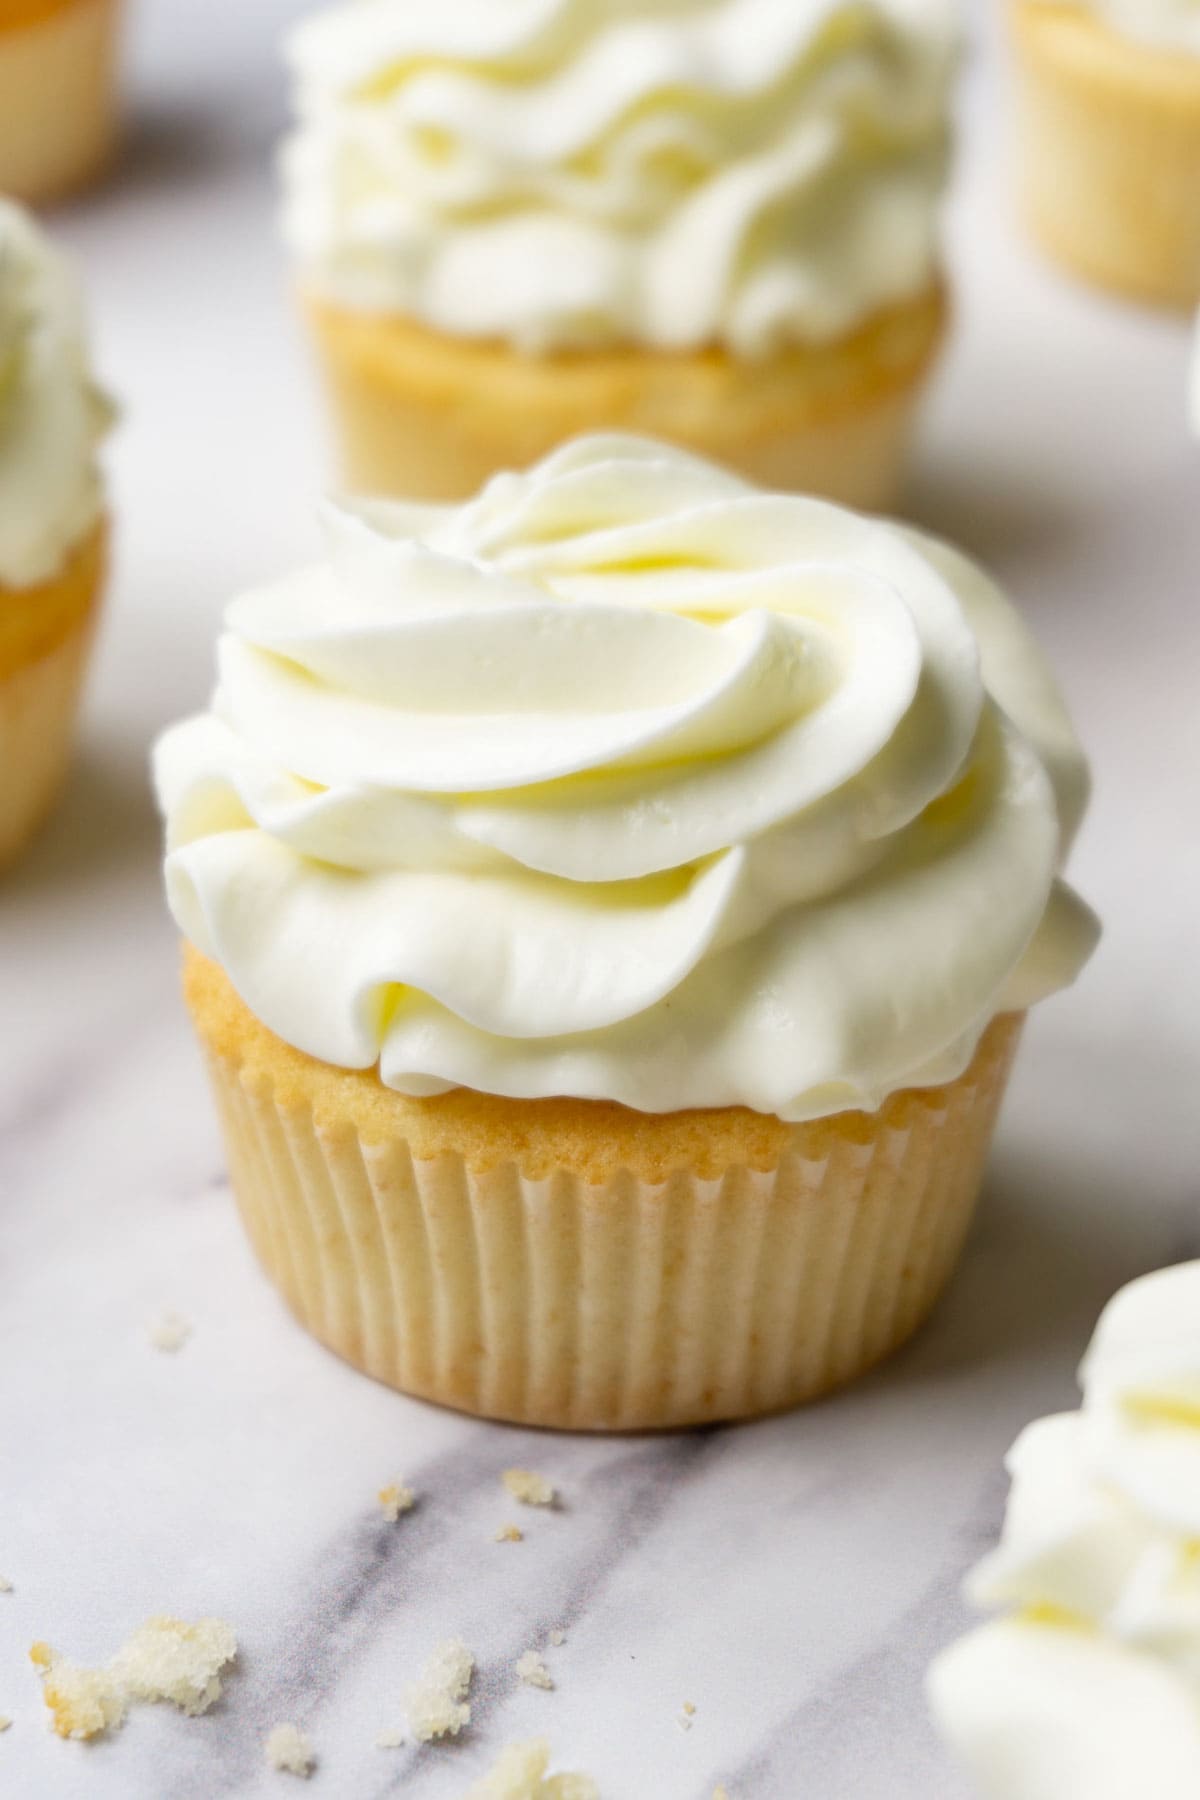 Vanilla cupcake with cream cheese frosting, more cupcakes are lying around.